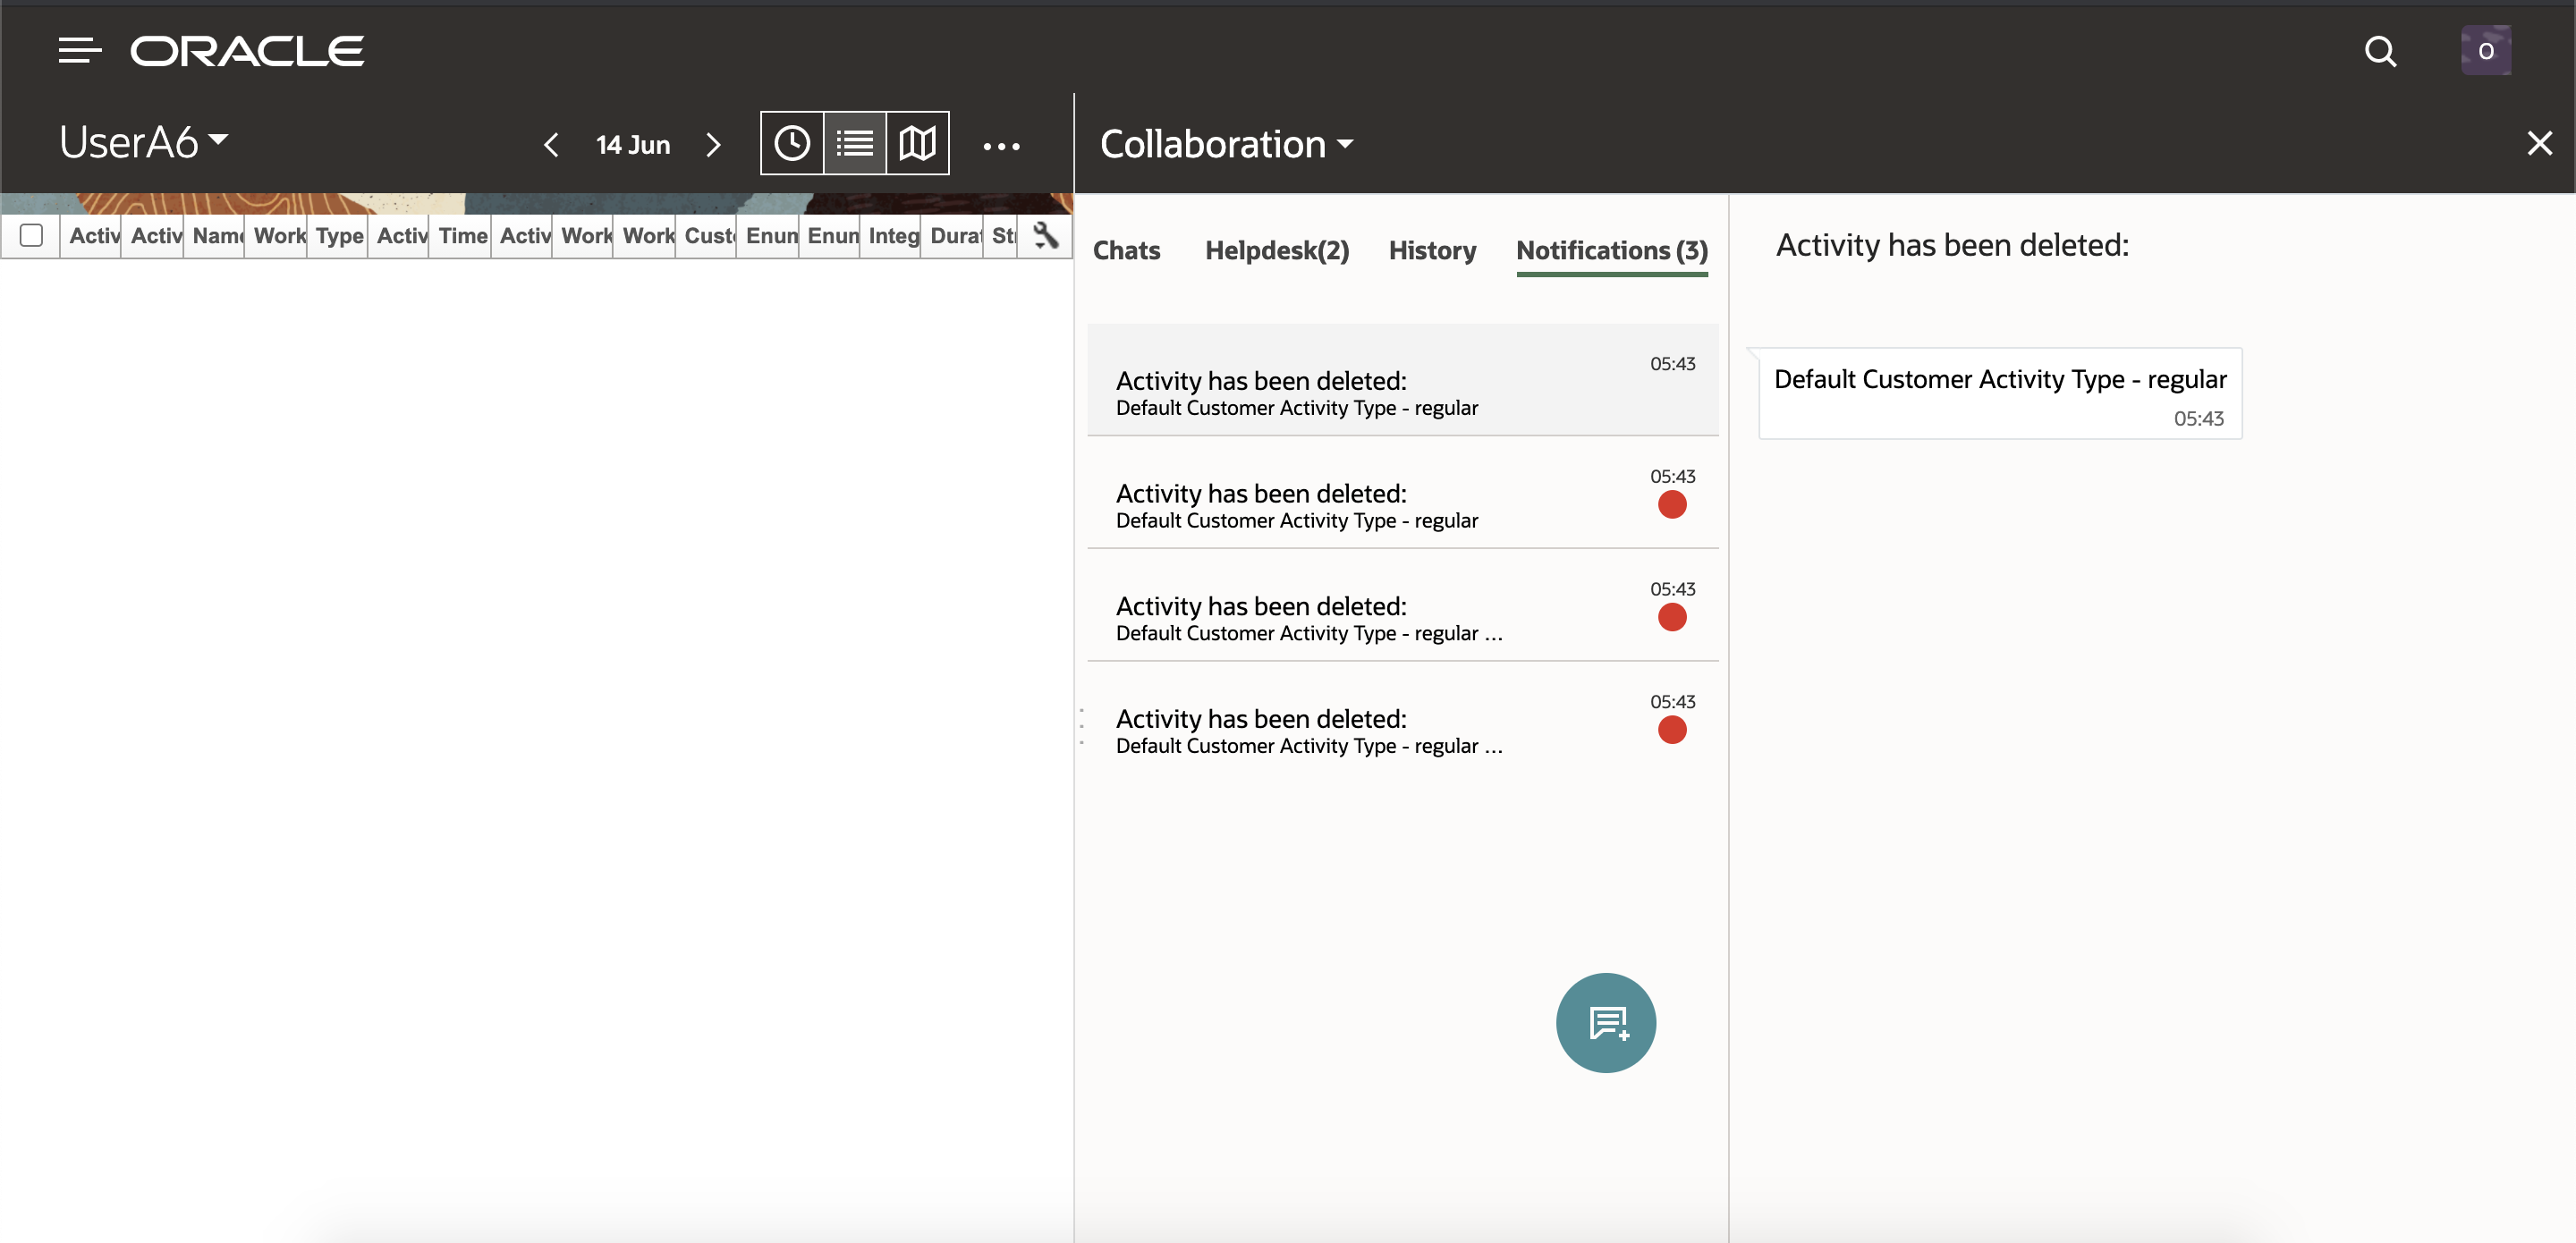 This screenshot shows the Collaboration window with the Notifications tab as seen in a browser.